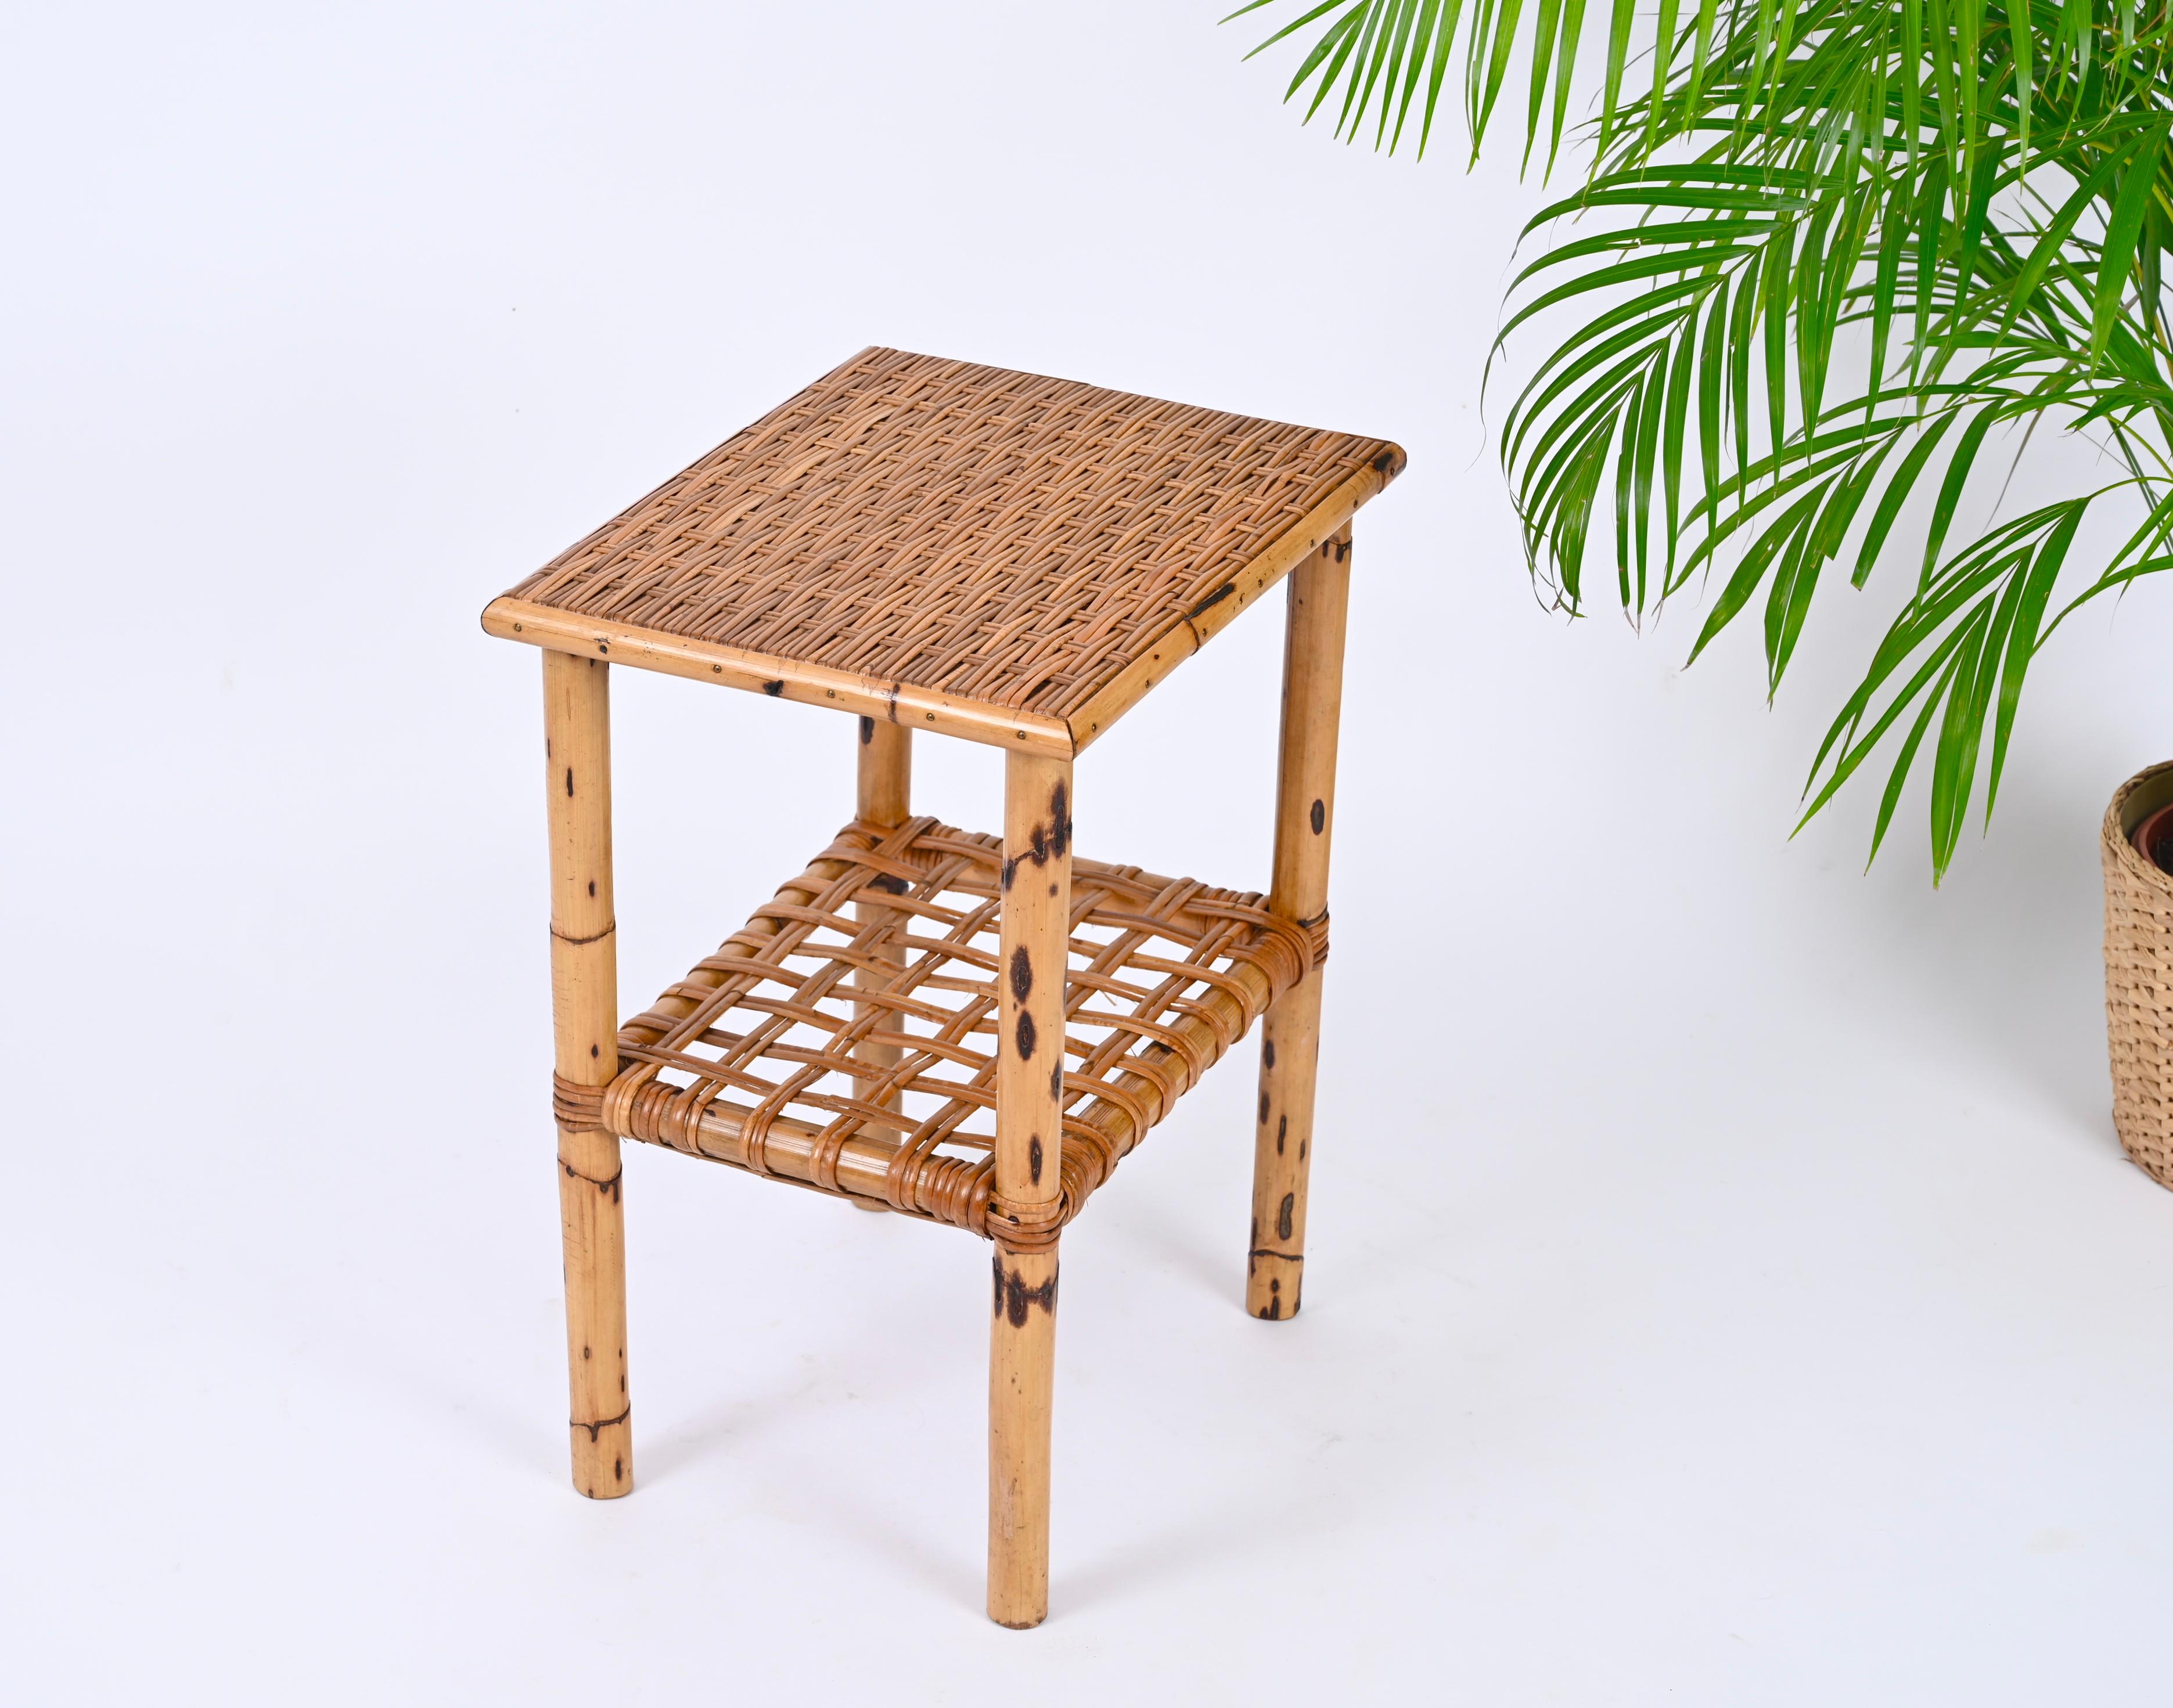 Hand-Woven Midcentury Bamboo and Rattan Italian Coffee Table with Magazine Rack, 1960s For Sale